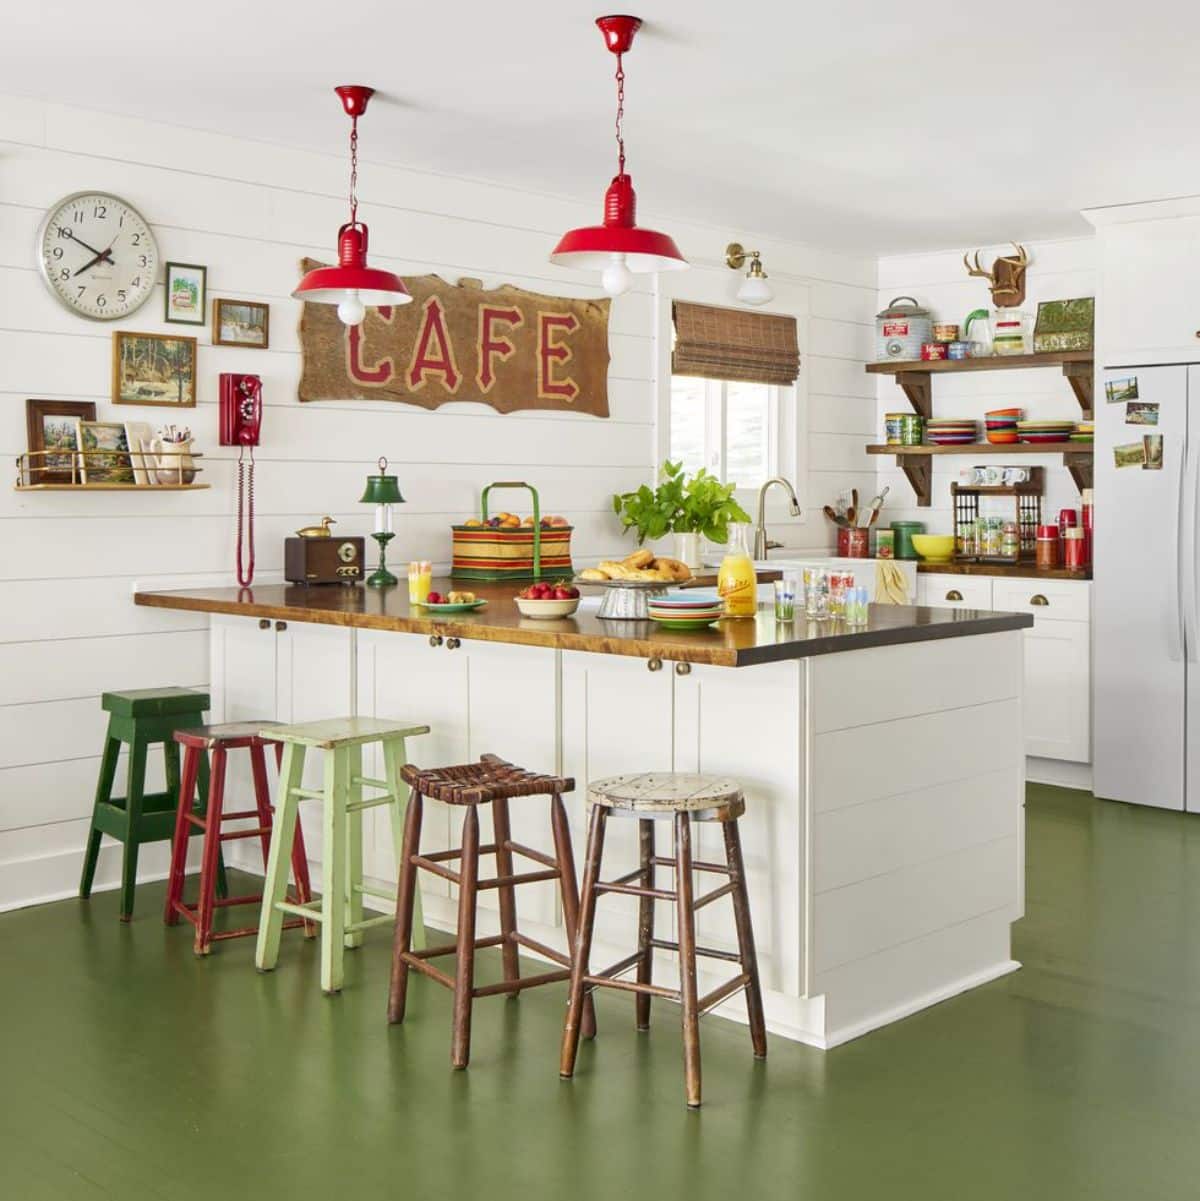 Green Painted Floors in Farmhouse Kitchen